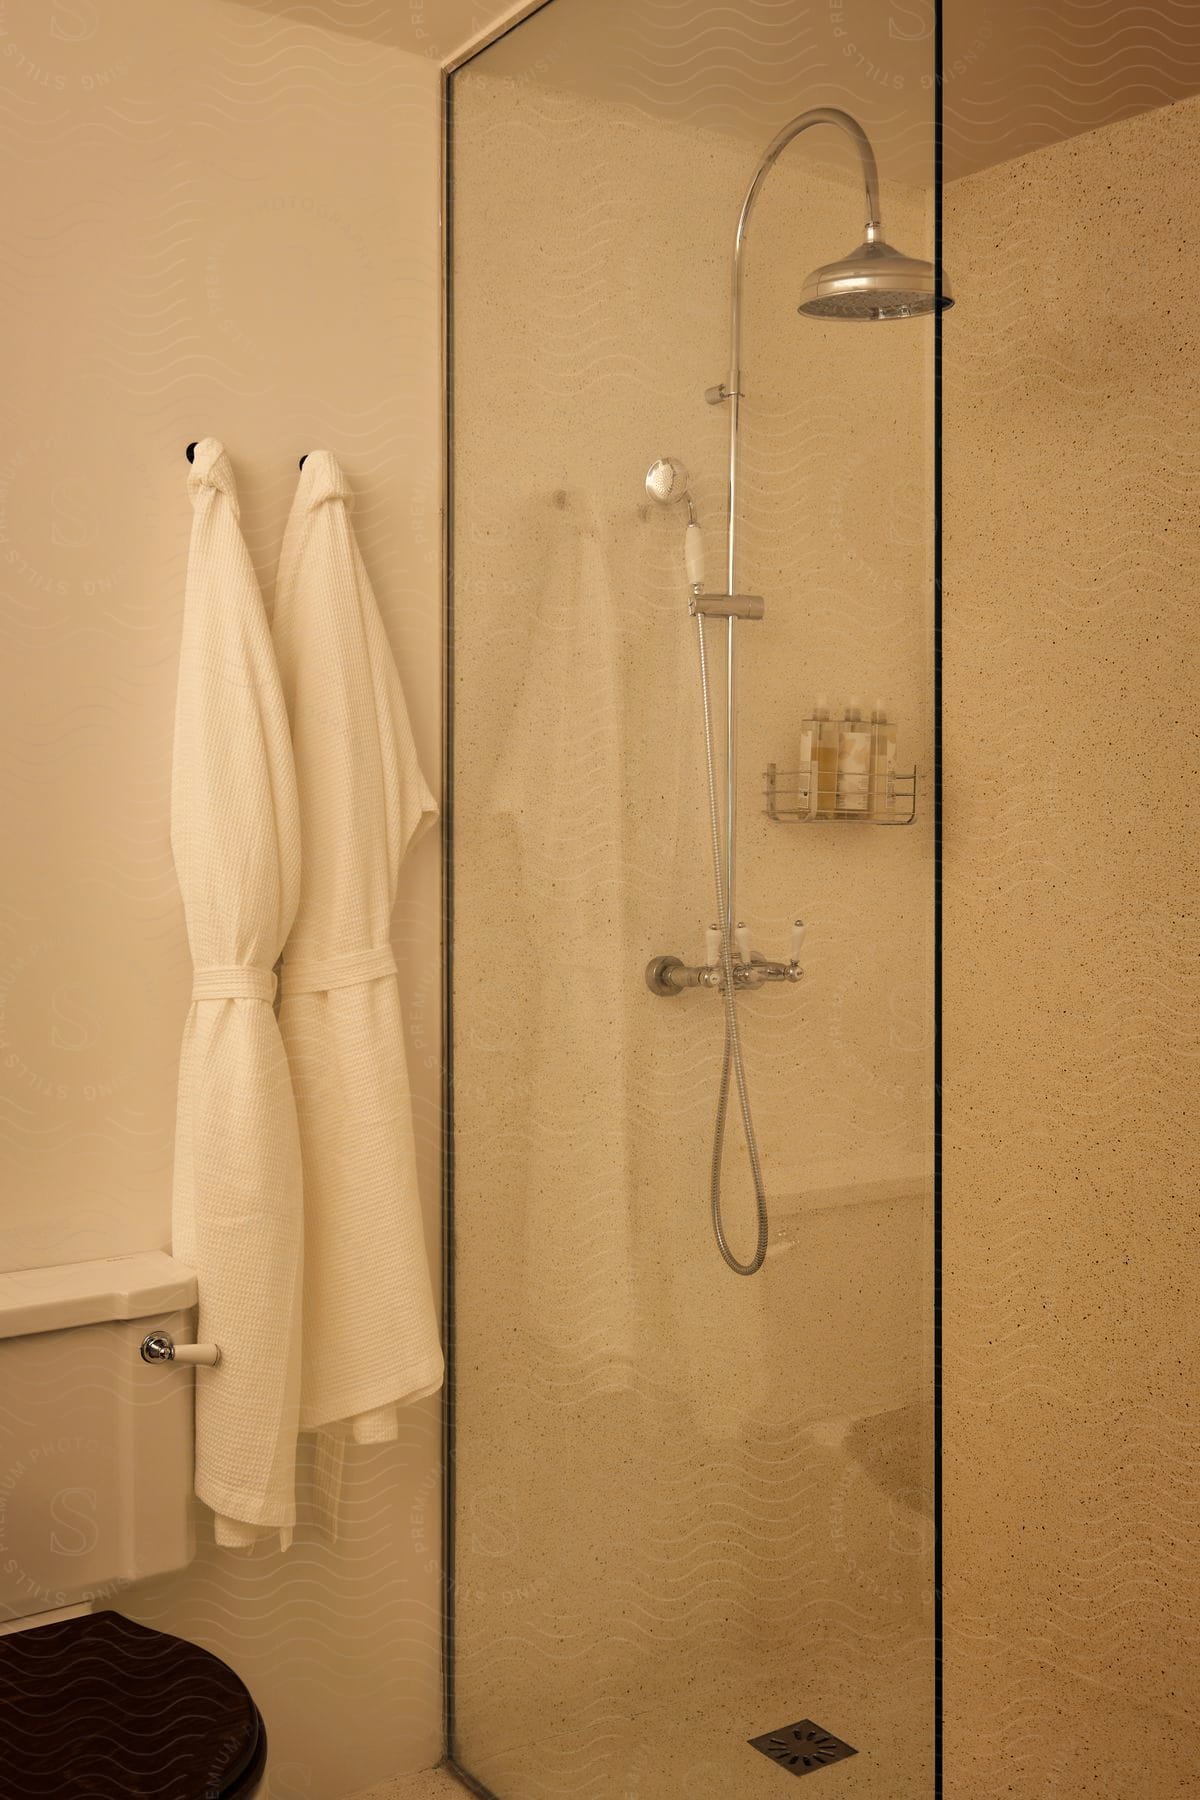 White robe hanging in the bathroom next to the shower